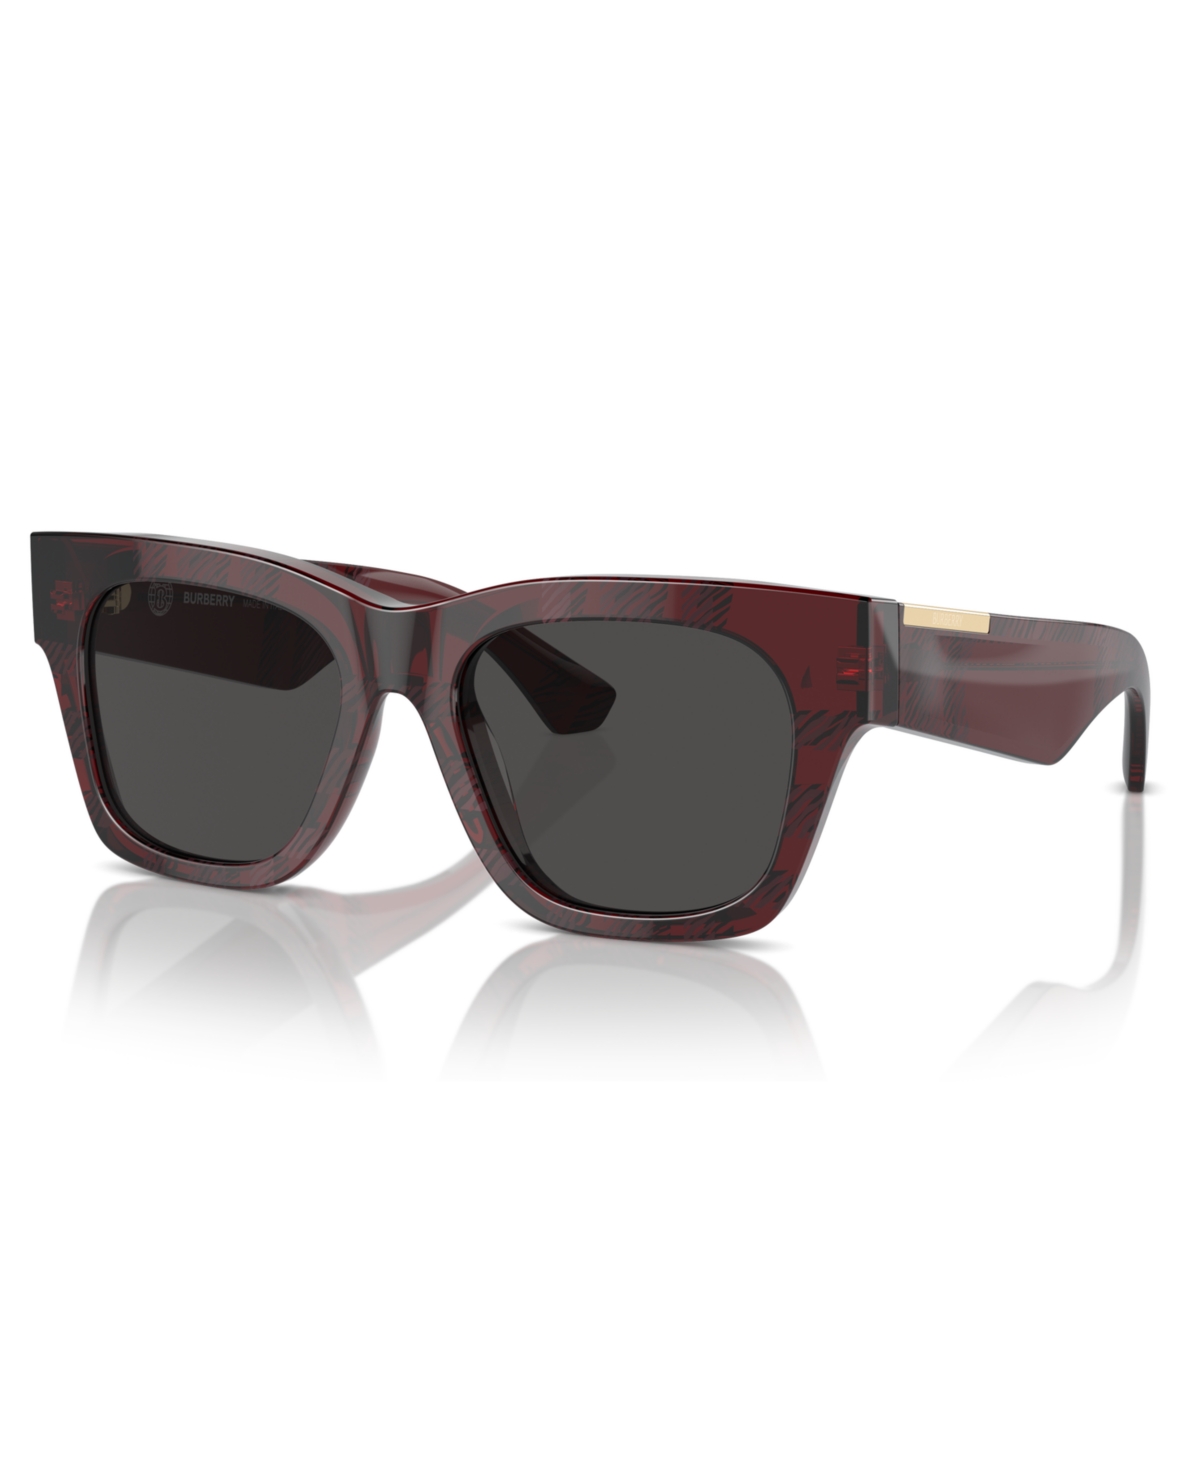 Burberry Women's Sunglasses, Be4424 In Check Red